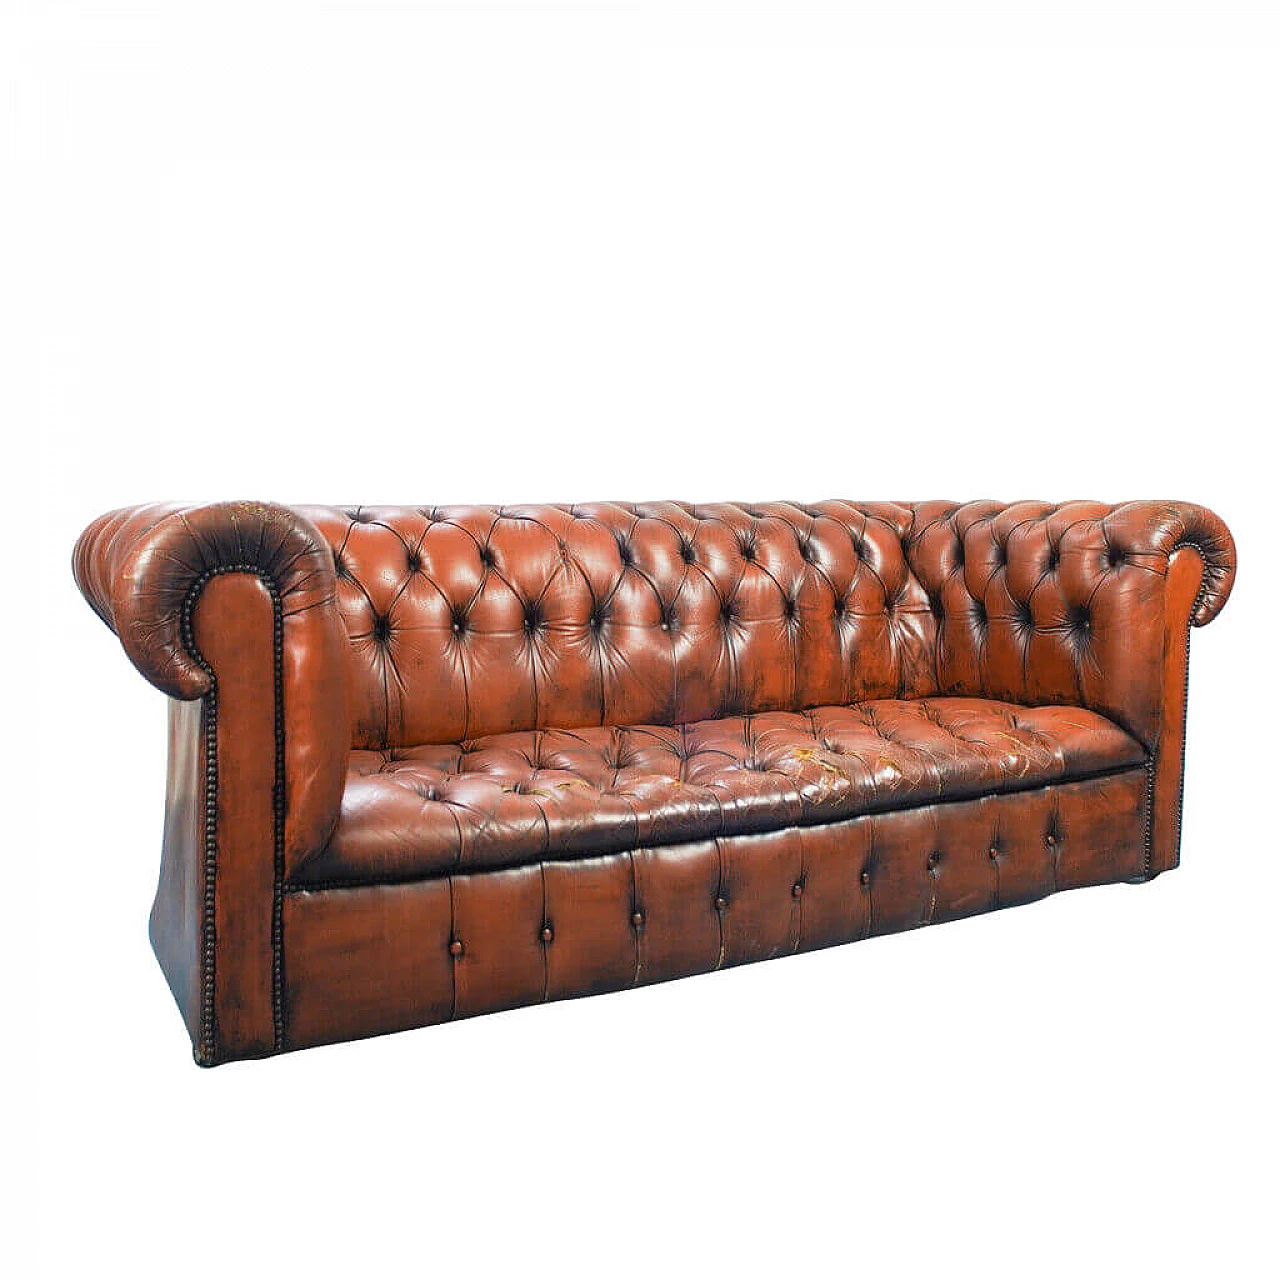 Chester sofa in leather capitonnas, 70s 1135846